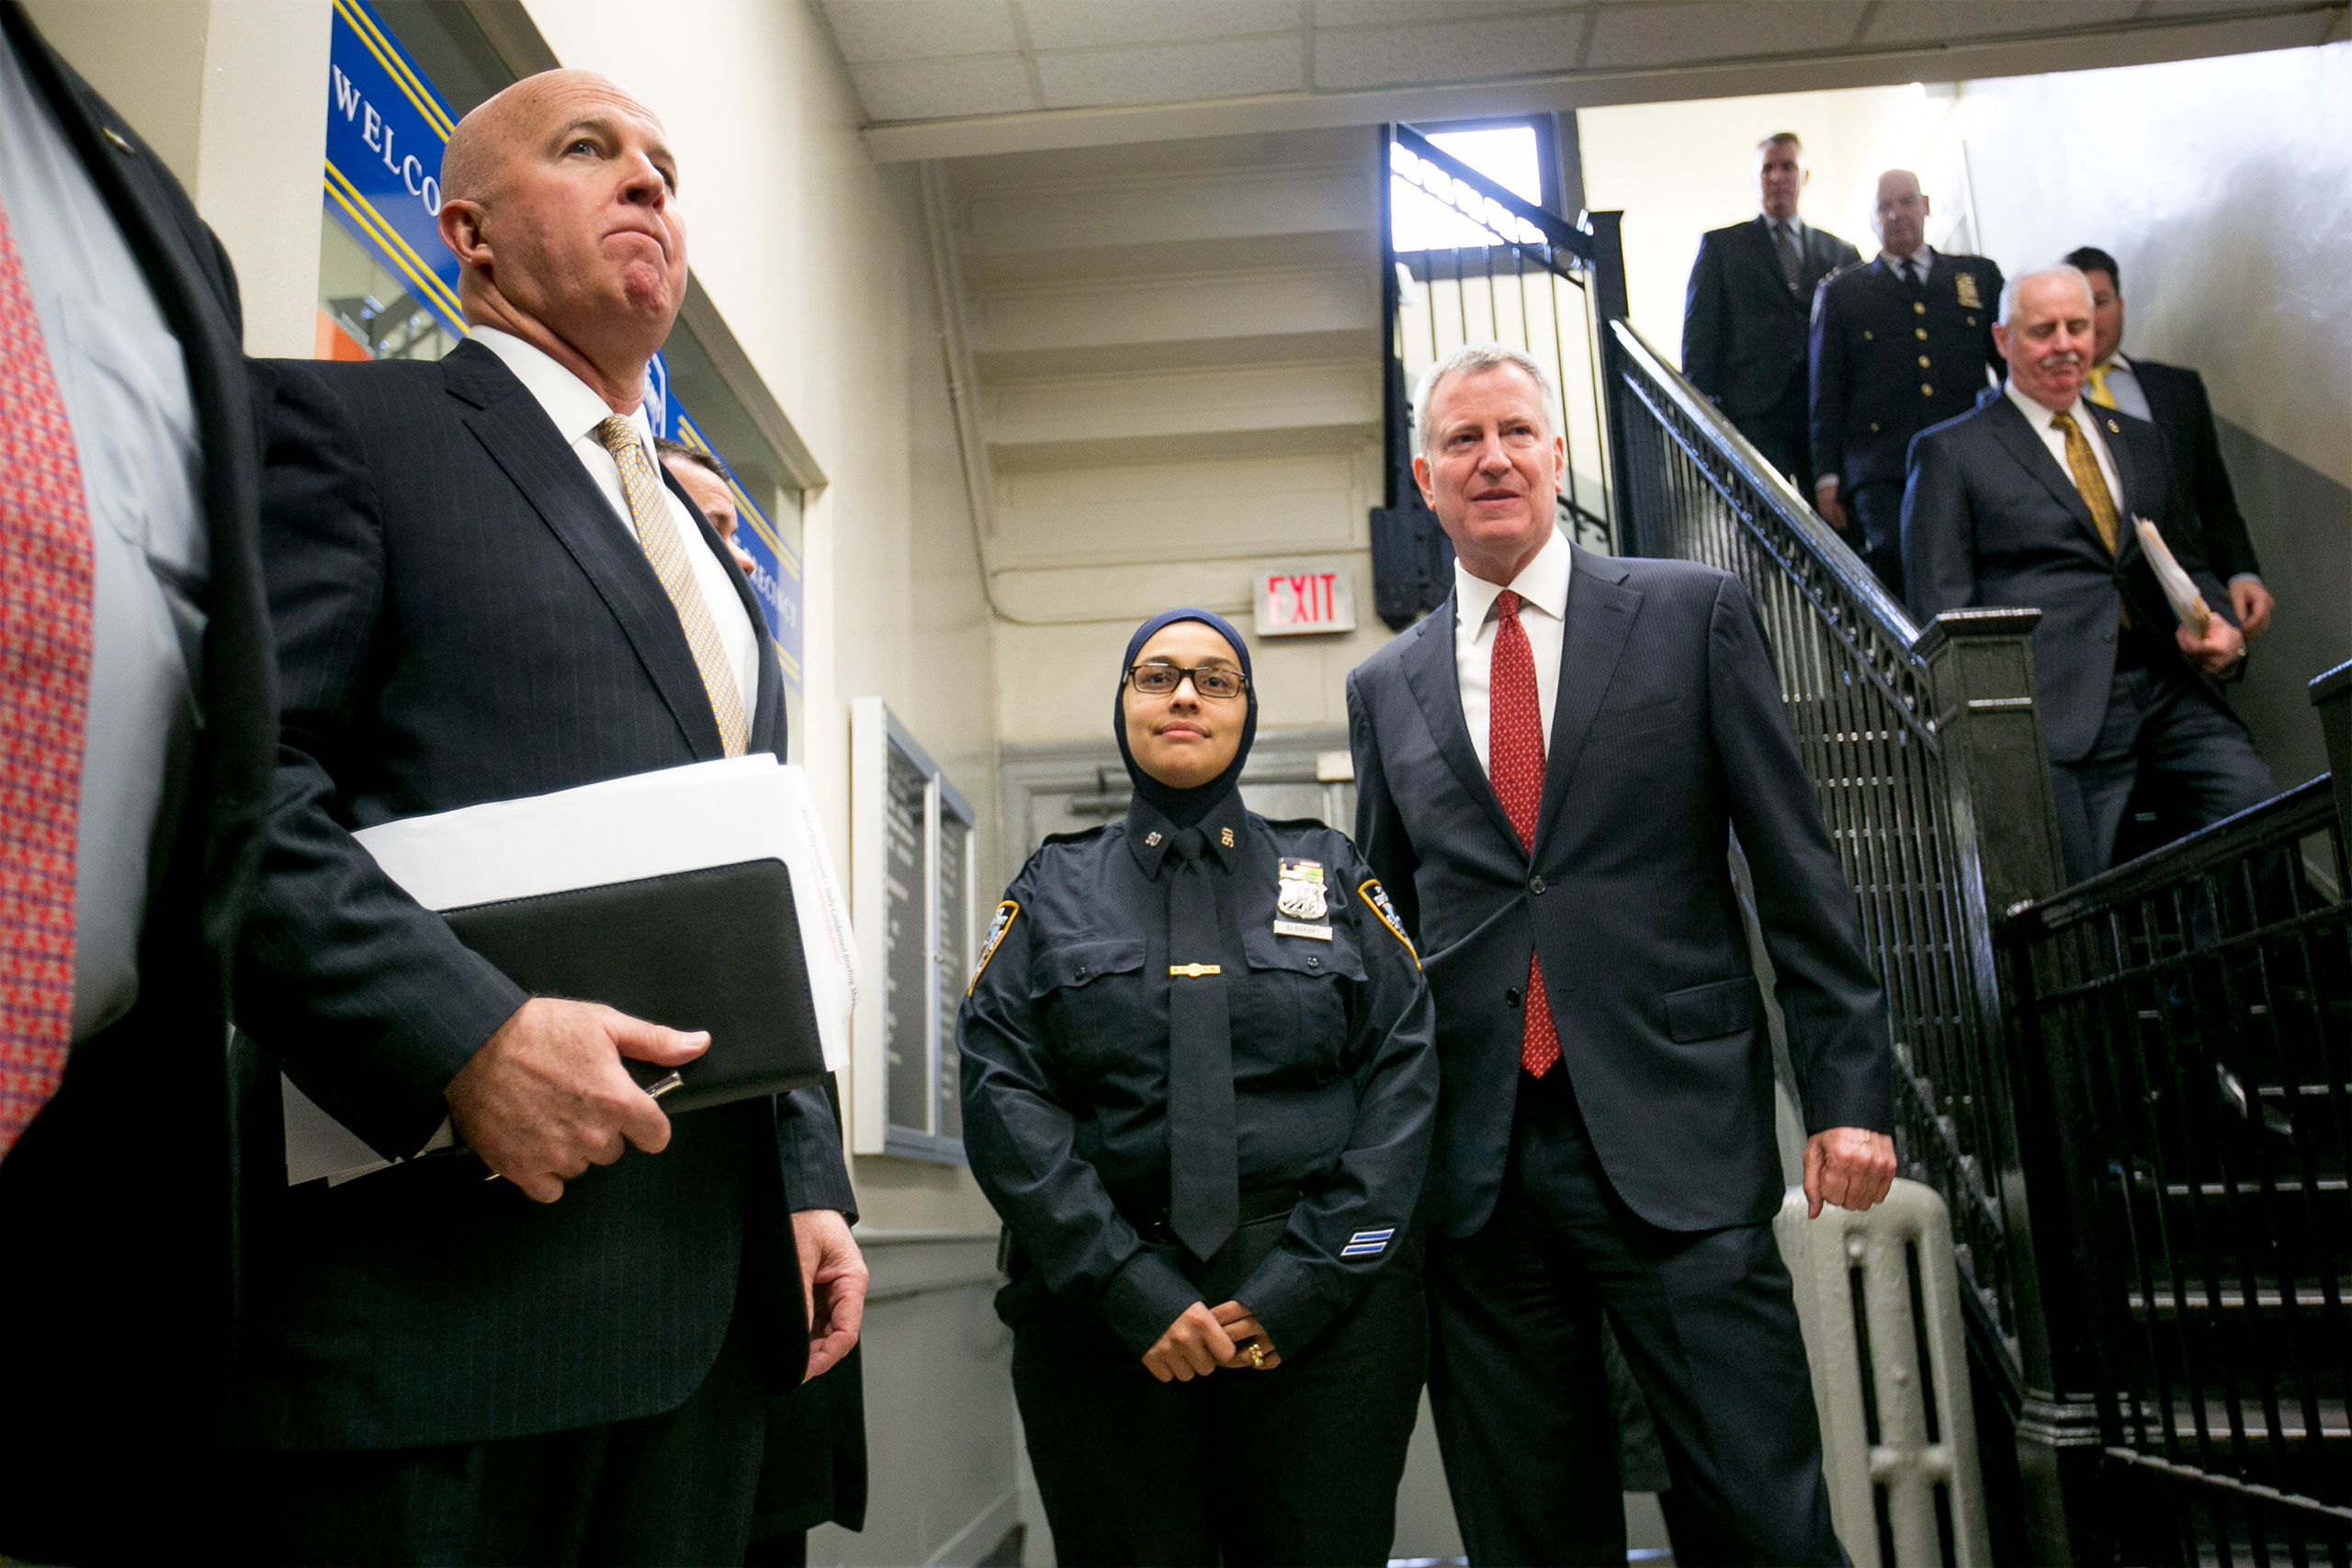 New York Police Department officer Aml Elsokary and Mayor Bill de Blasio stop for a photo at the city's monthly crime statistics news conference in New York on Dec. 5, 2016. (Anthony Lanzilote—The New York Times/Redux)